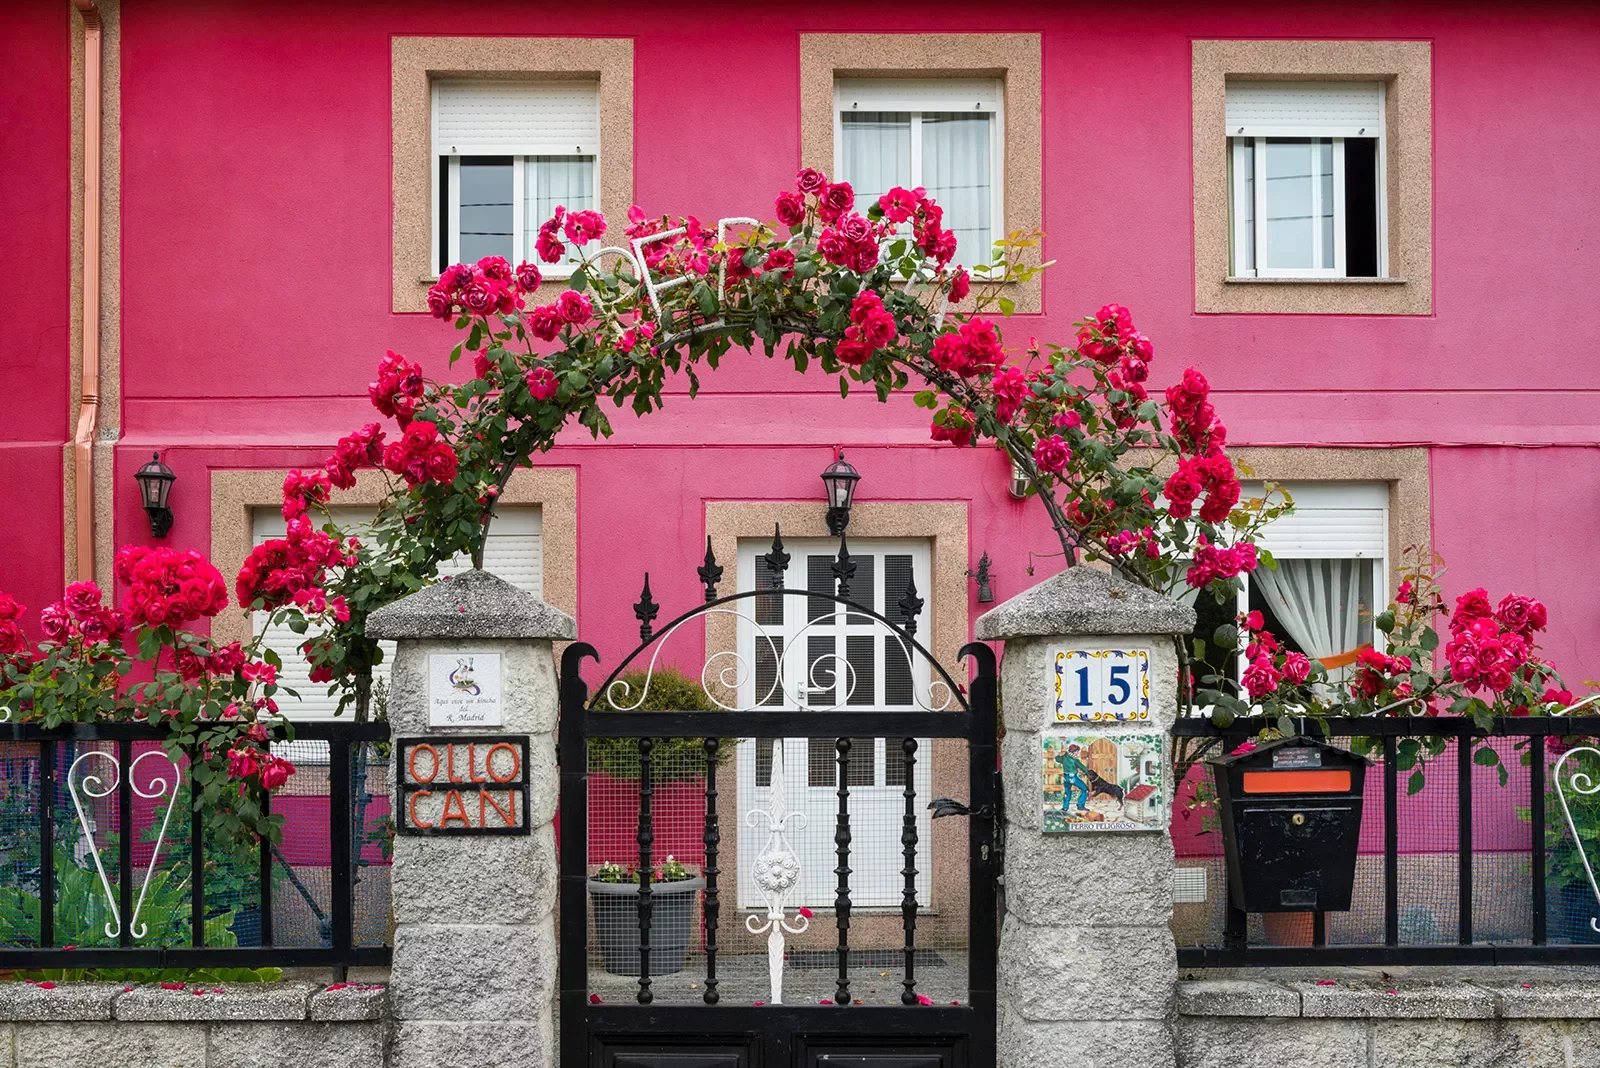 Housefront shot of bright pink building, flower arch, metal fence.